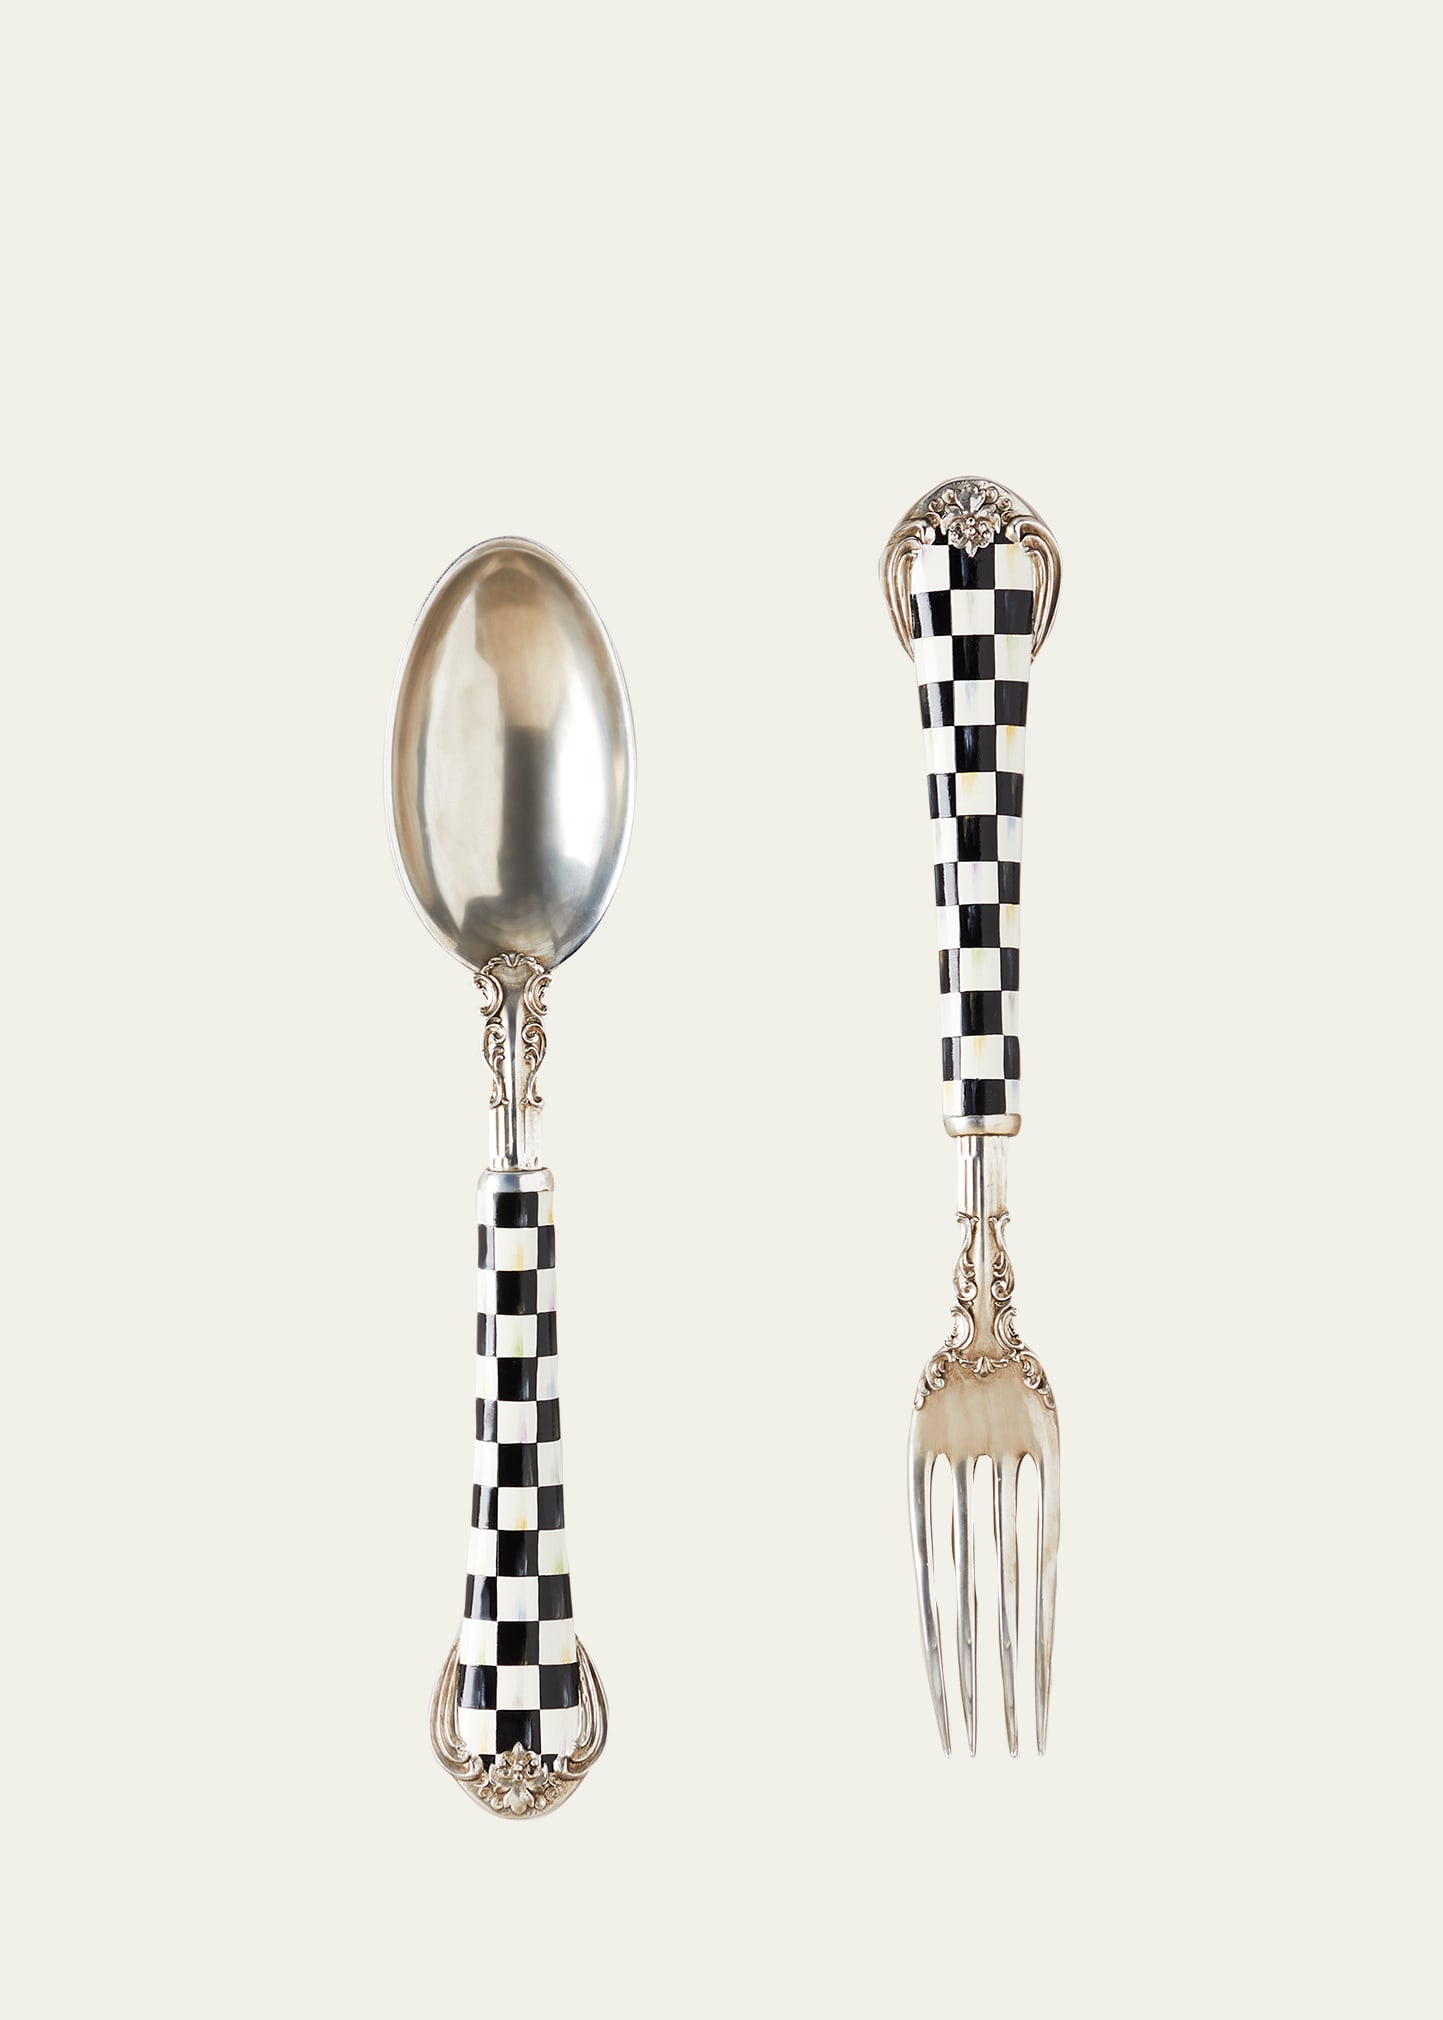 Courtly Check Spoon Fork